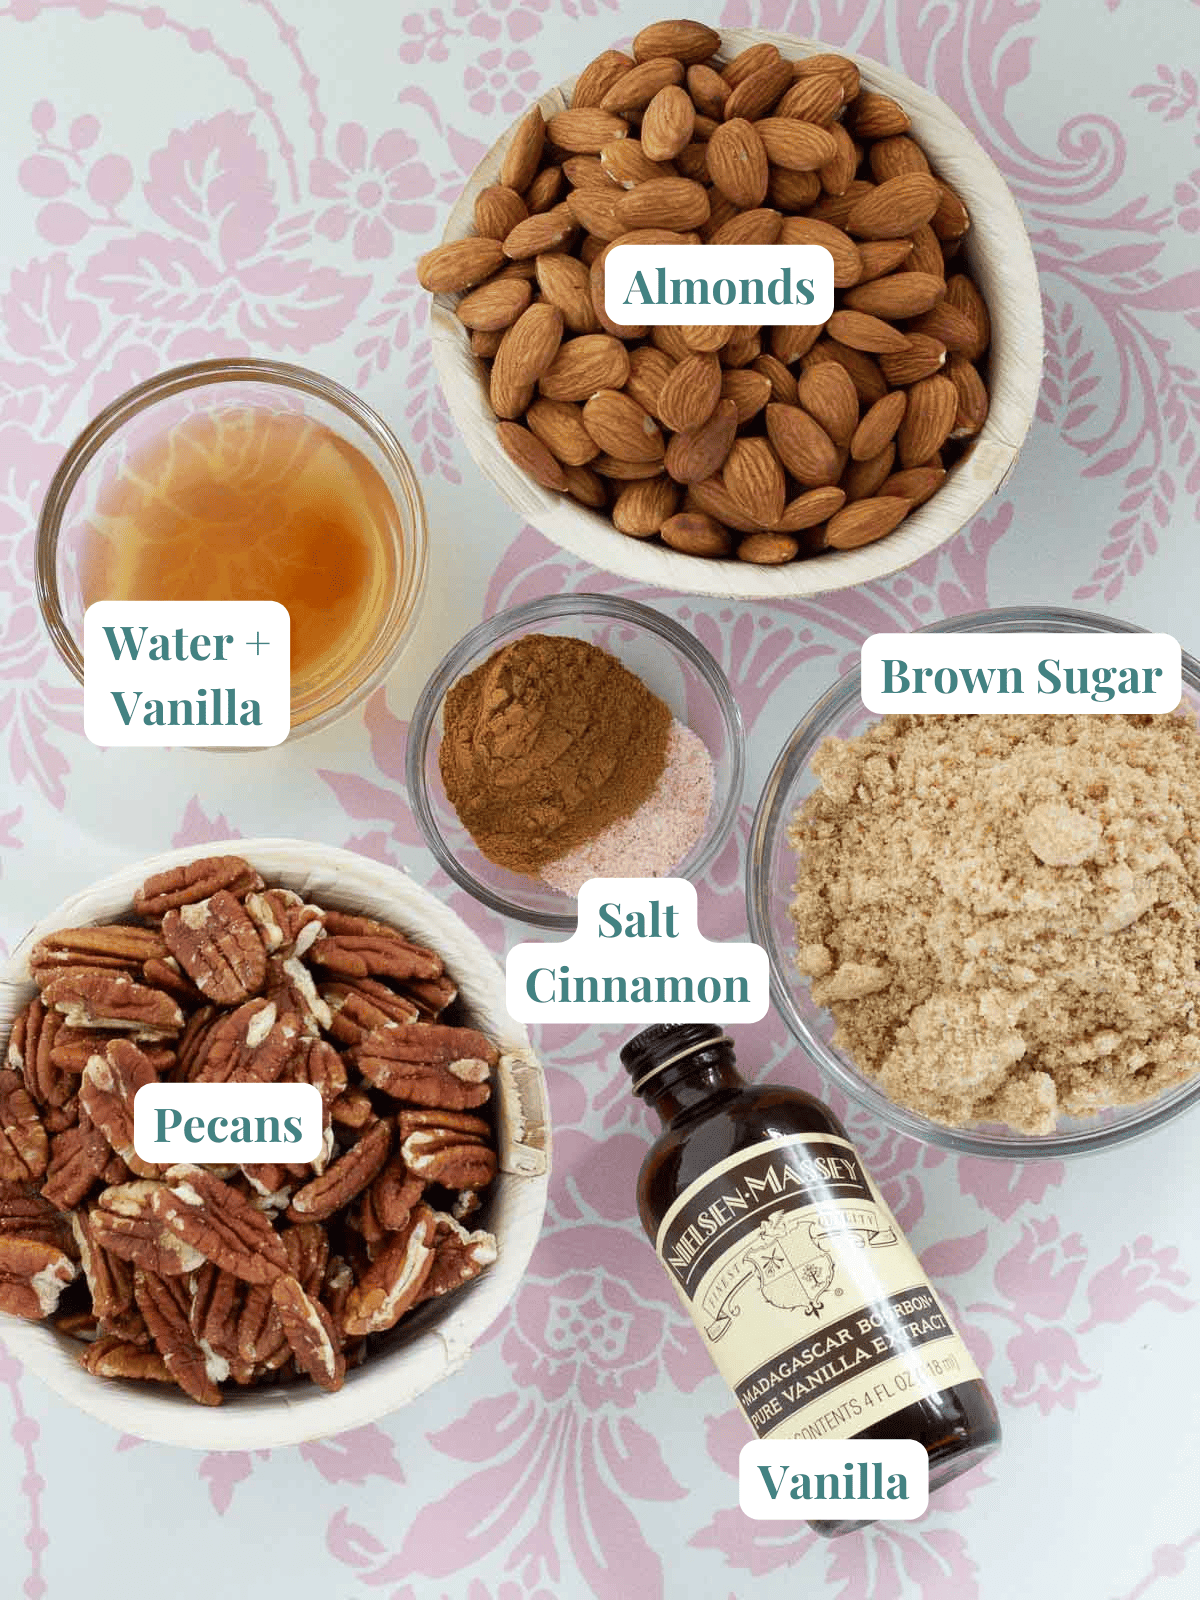 candied pecans and almonds ingredients.